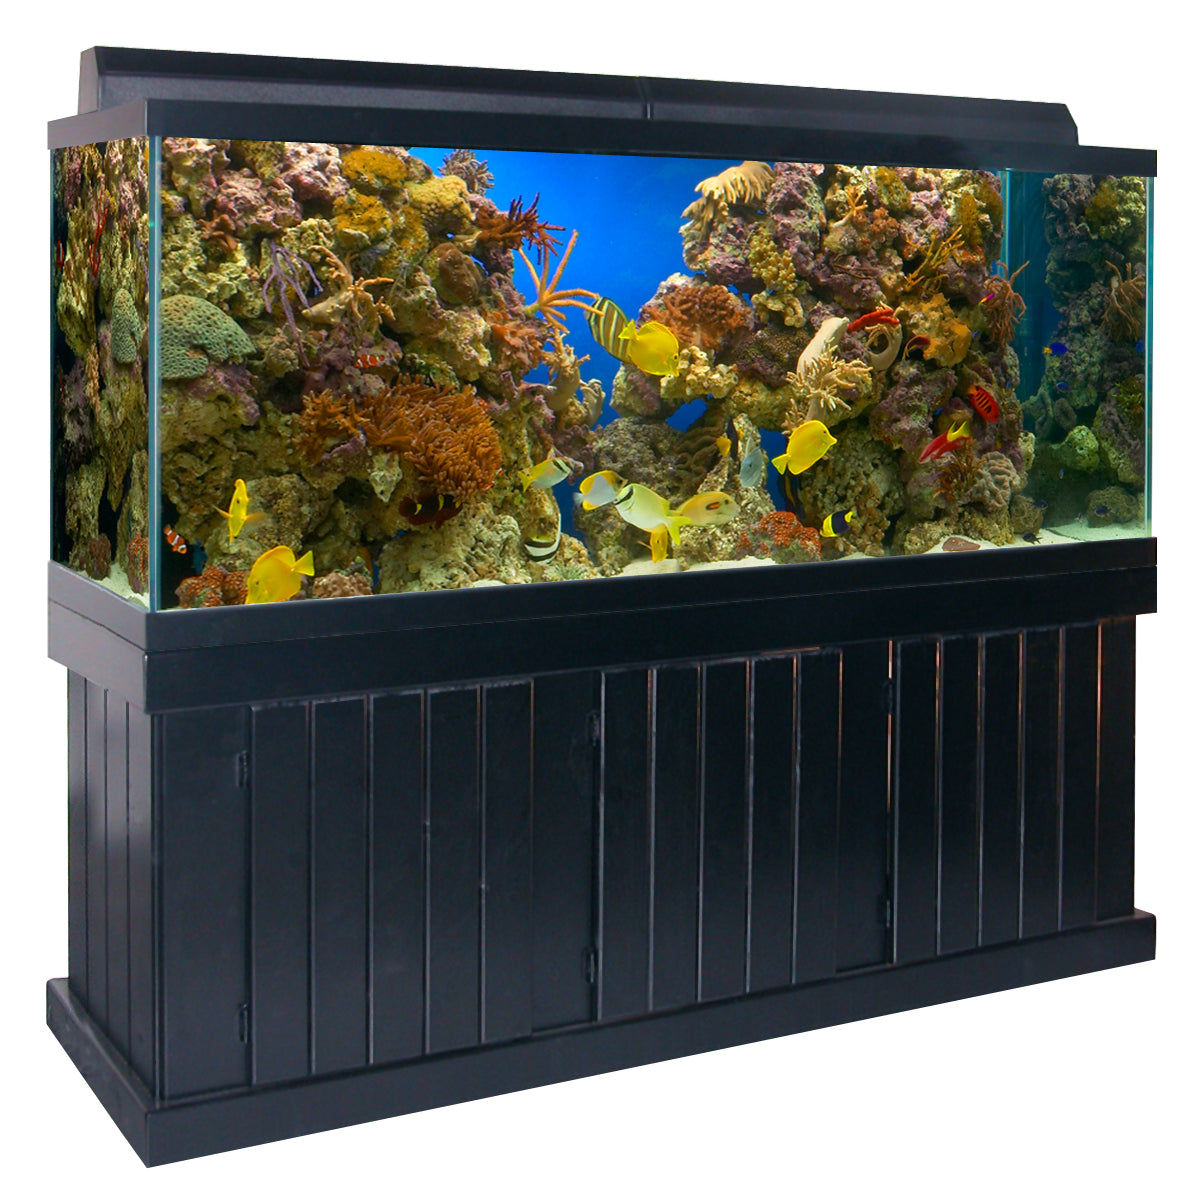 Classic Aquarium Stand 48.5 by 18.5 fits 75 gallon or 90 gallon